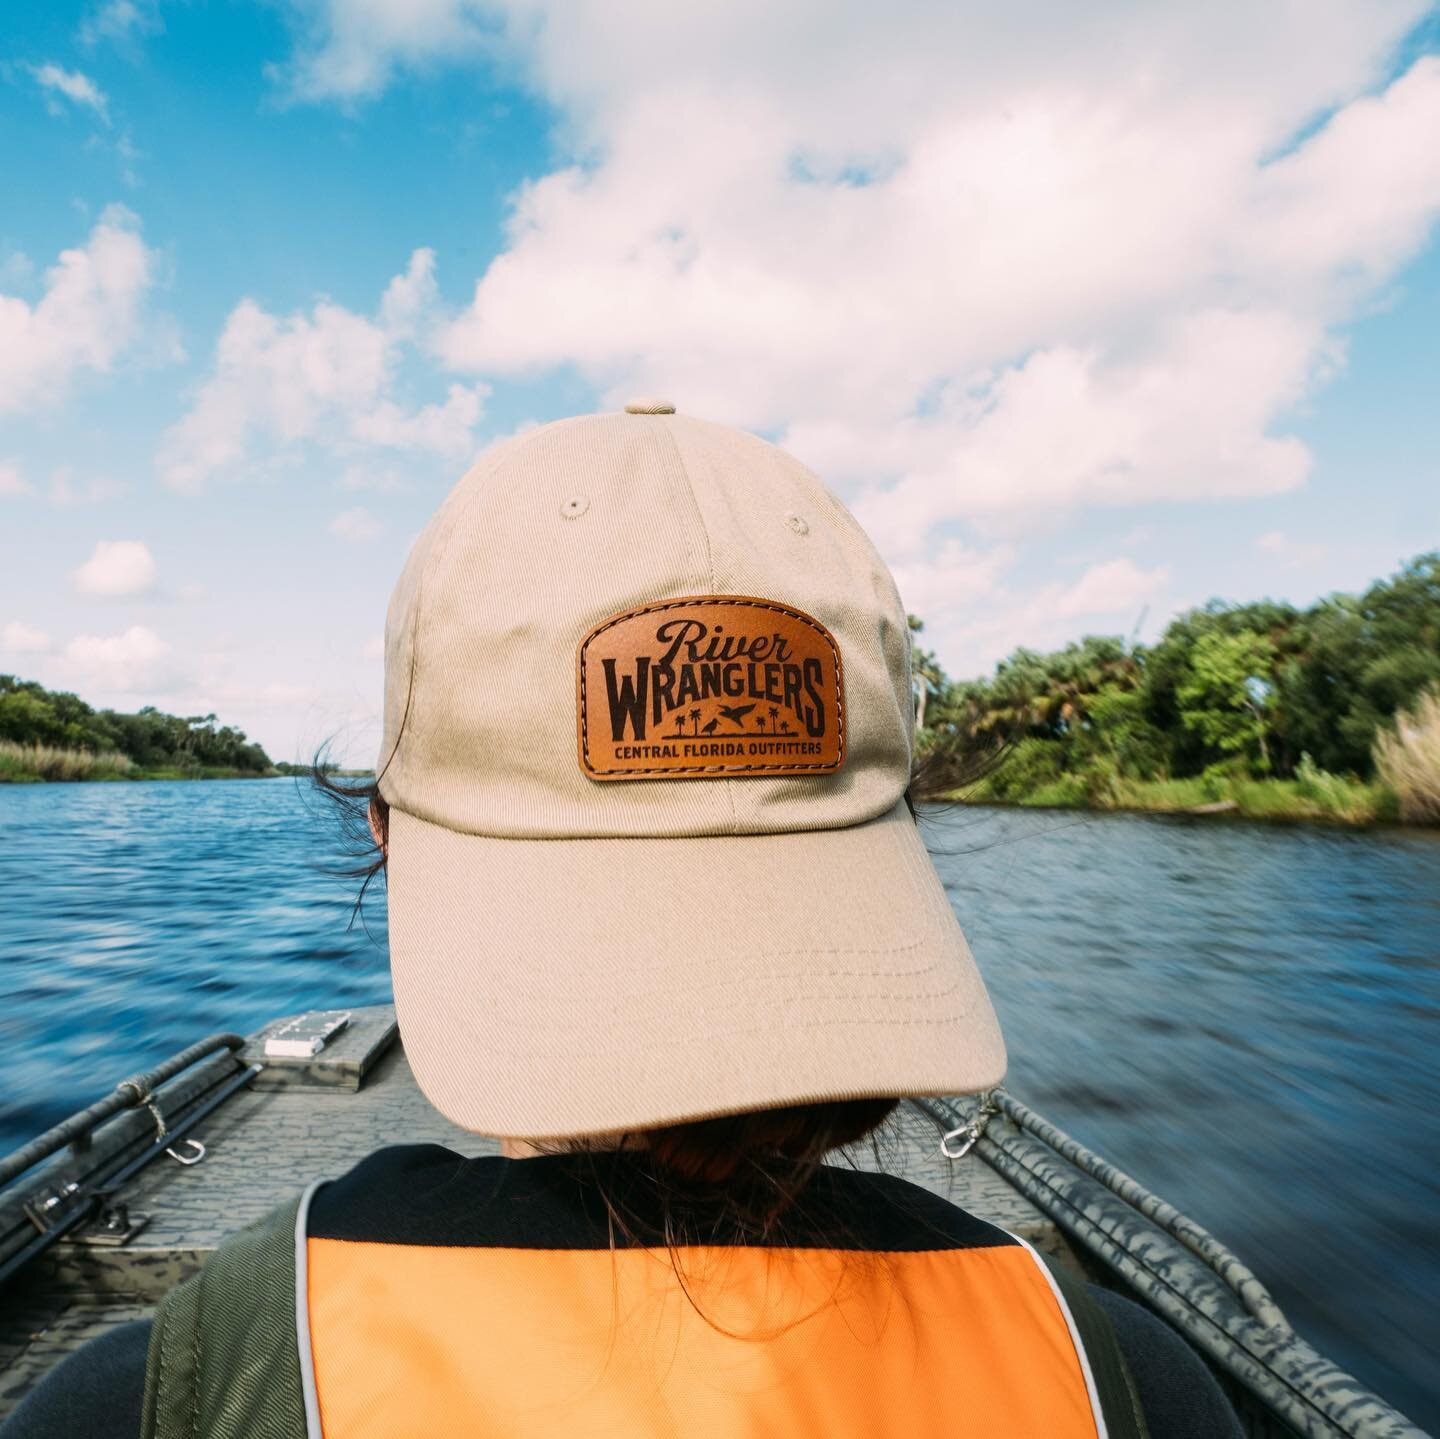 GIVEAWAY: Today is the LAST day to preorder your river wrangler hats! Limited inventory will be available after. Go to the link in our bio to buy your hat today! Tag three friends to get entered to win a free sticker pack! Check them out on the last 